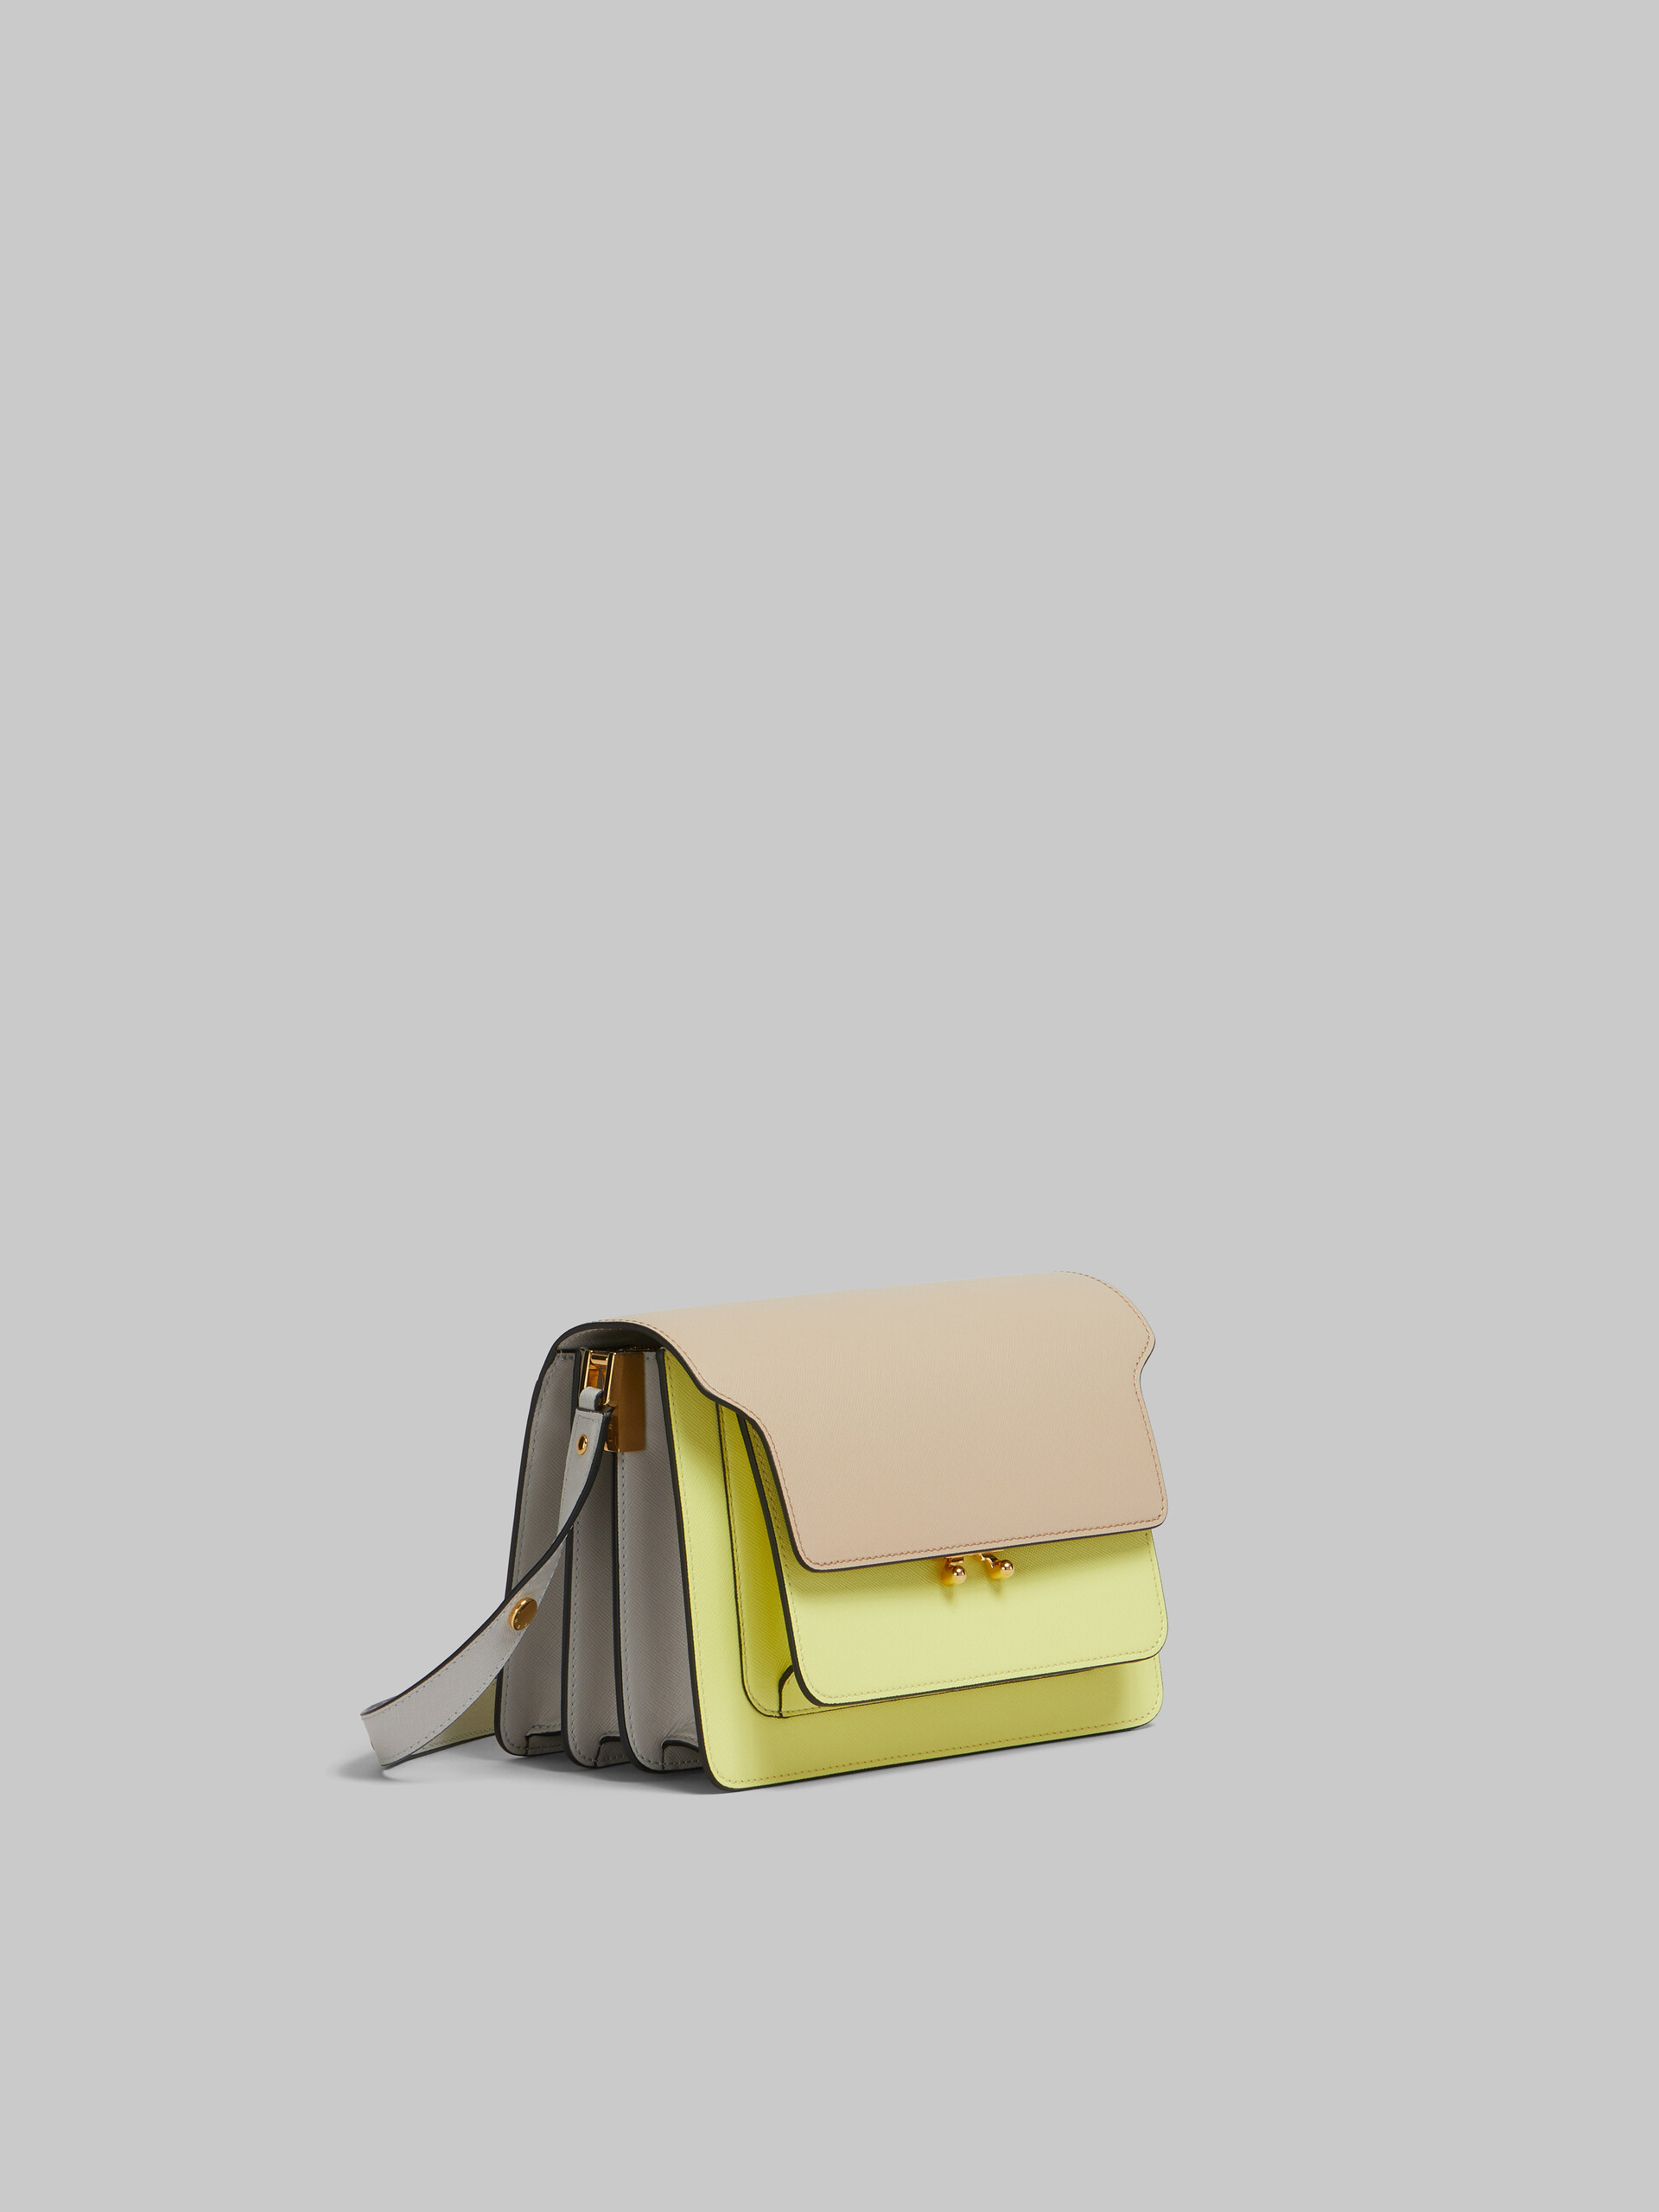 Tan yellow and grey saffiano leather medium Trunk bag - Shoulder Bags - Image 5